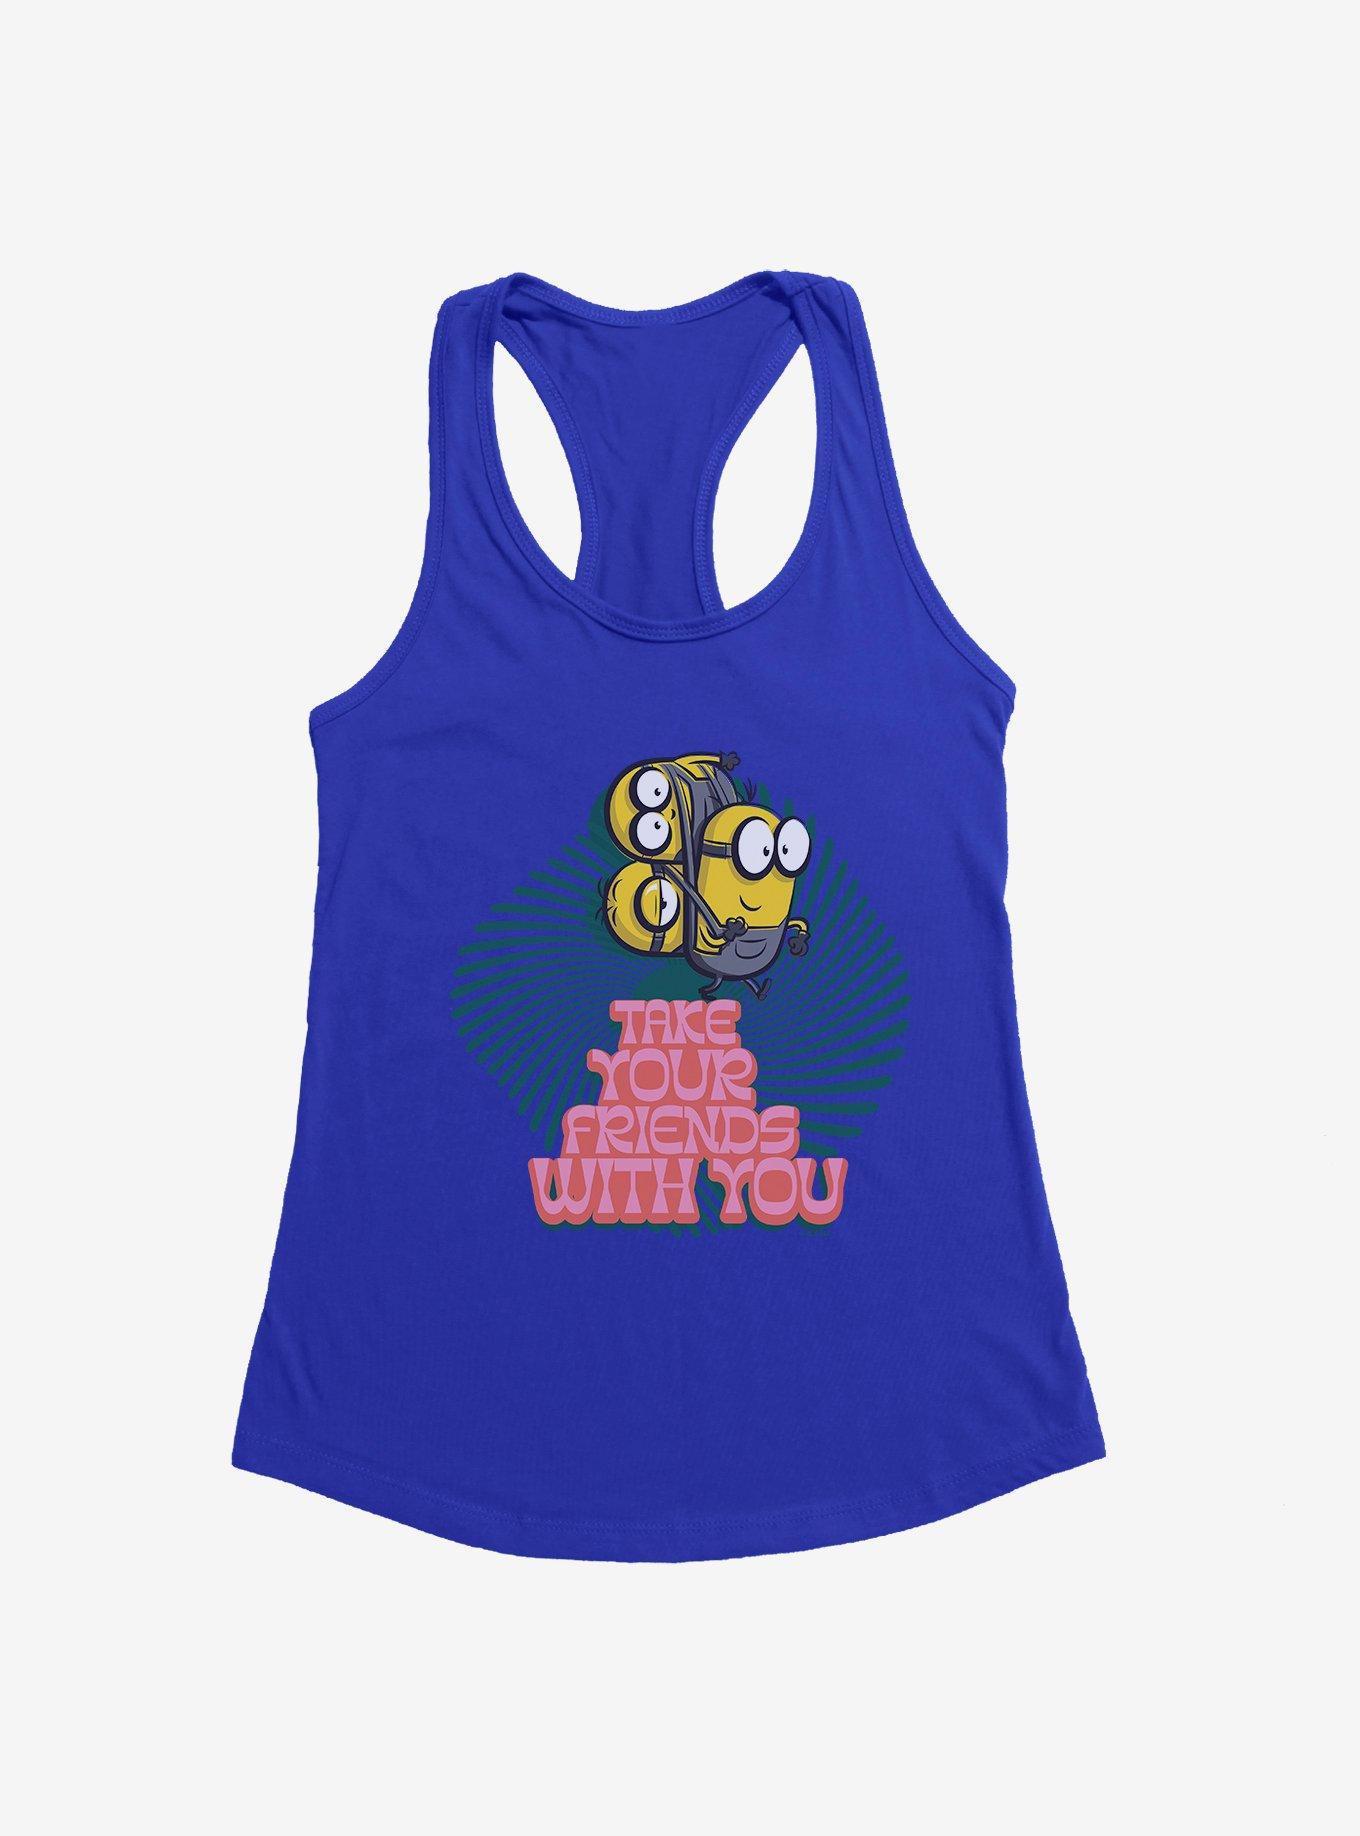 Minions Groovy Take Your Friends Girls Tank, ROYAL, hi-res